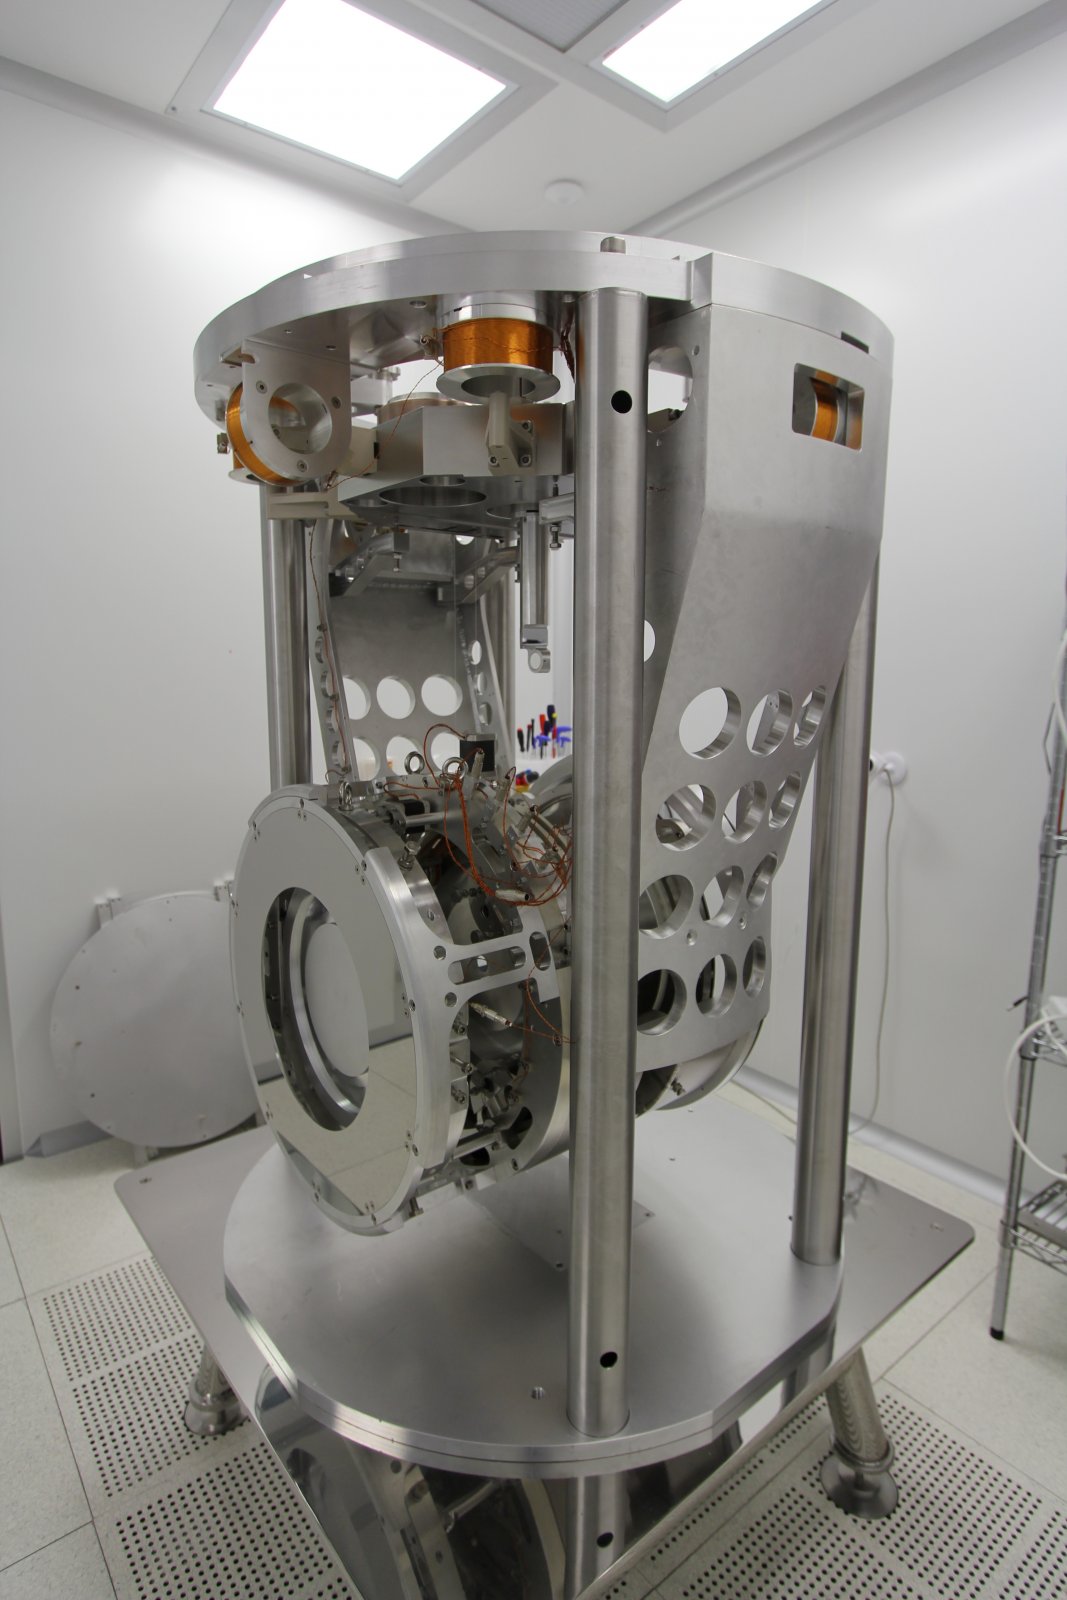 West input dummy payload assembled in clean-room (2015)